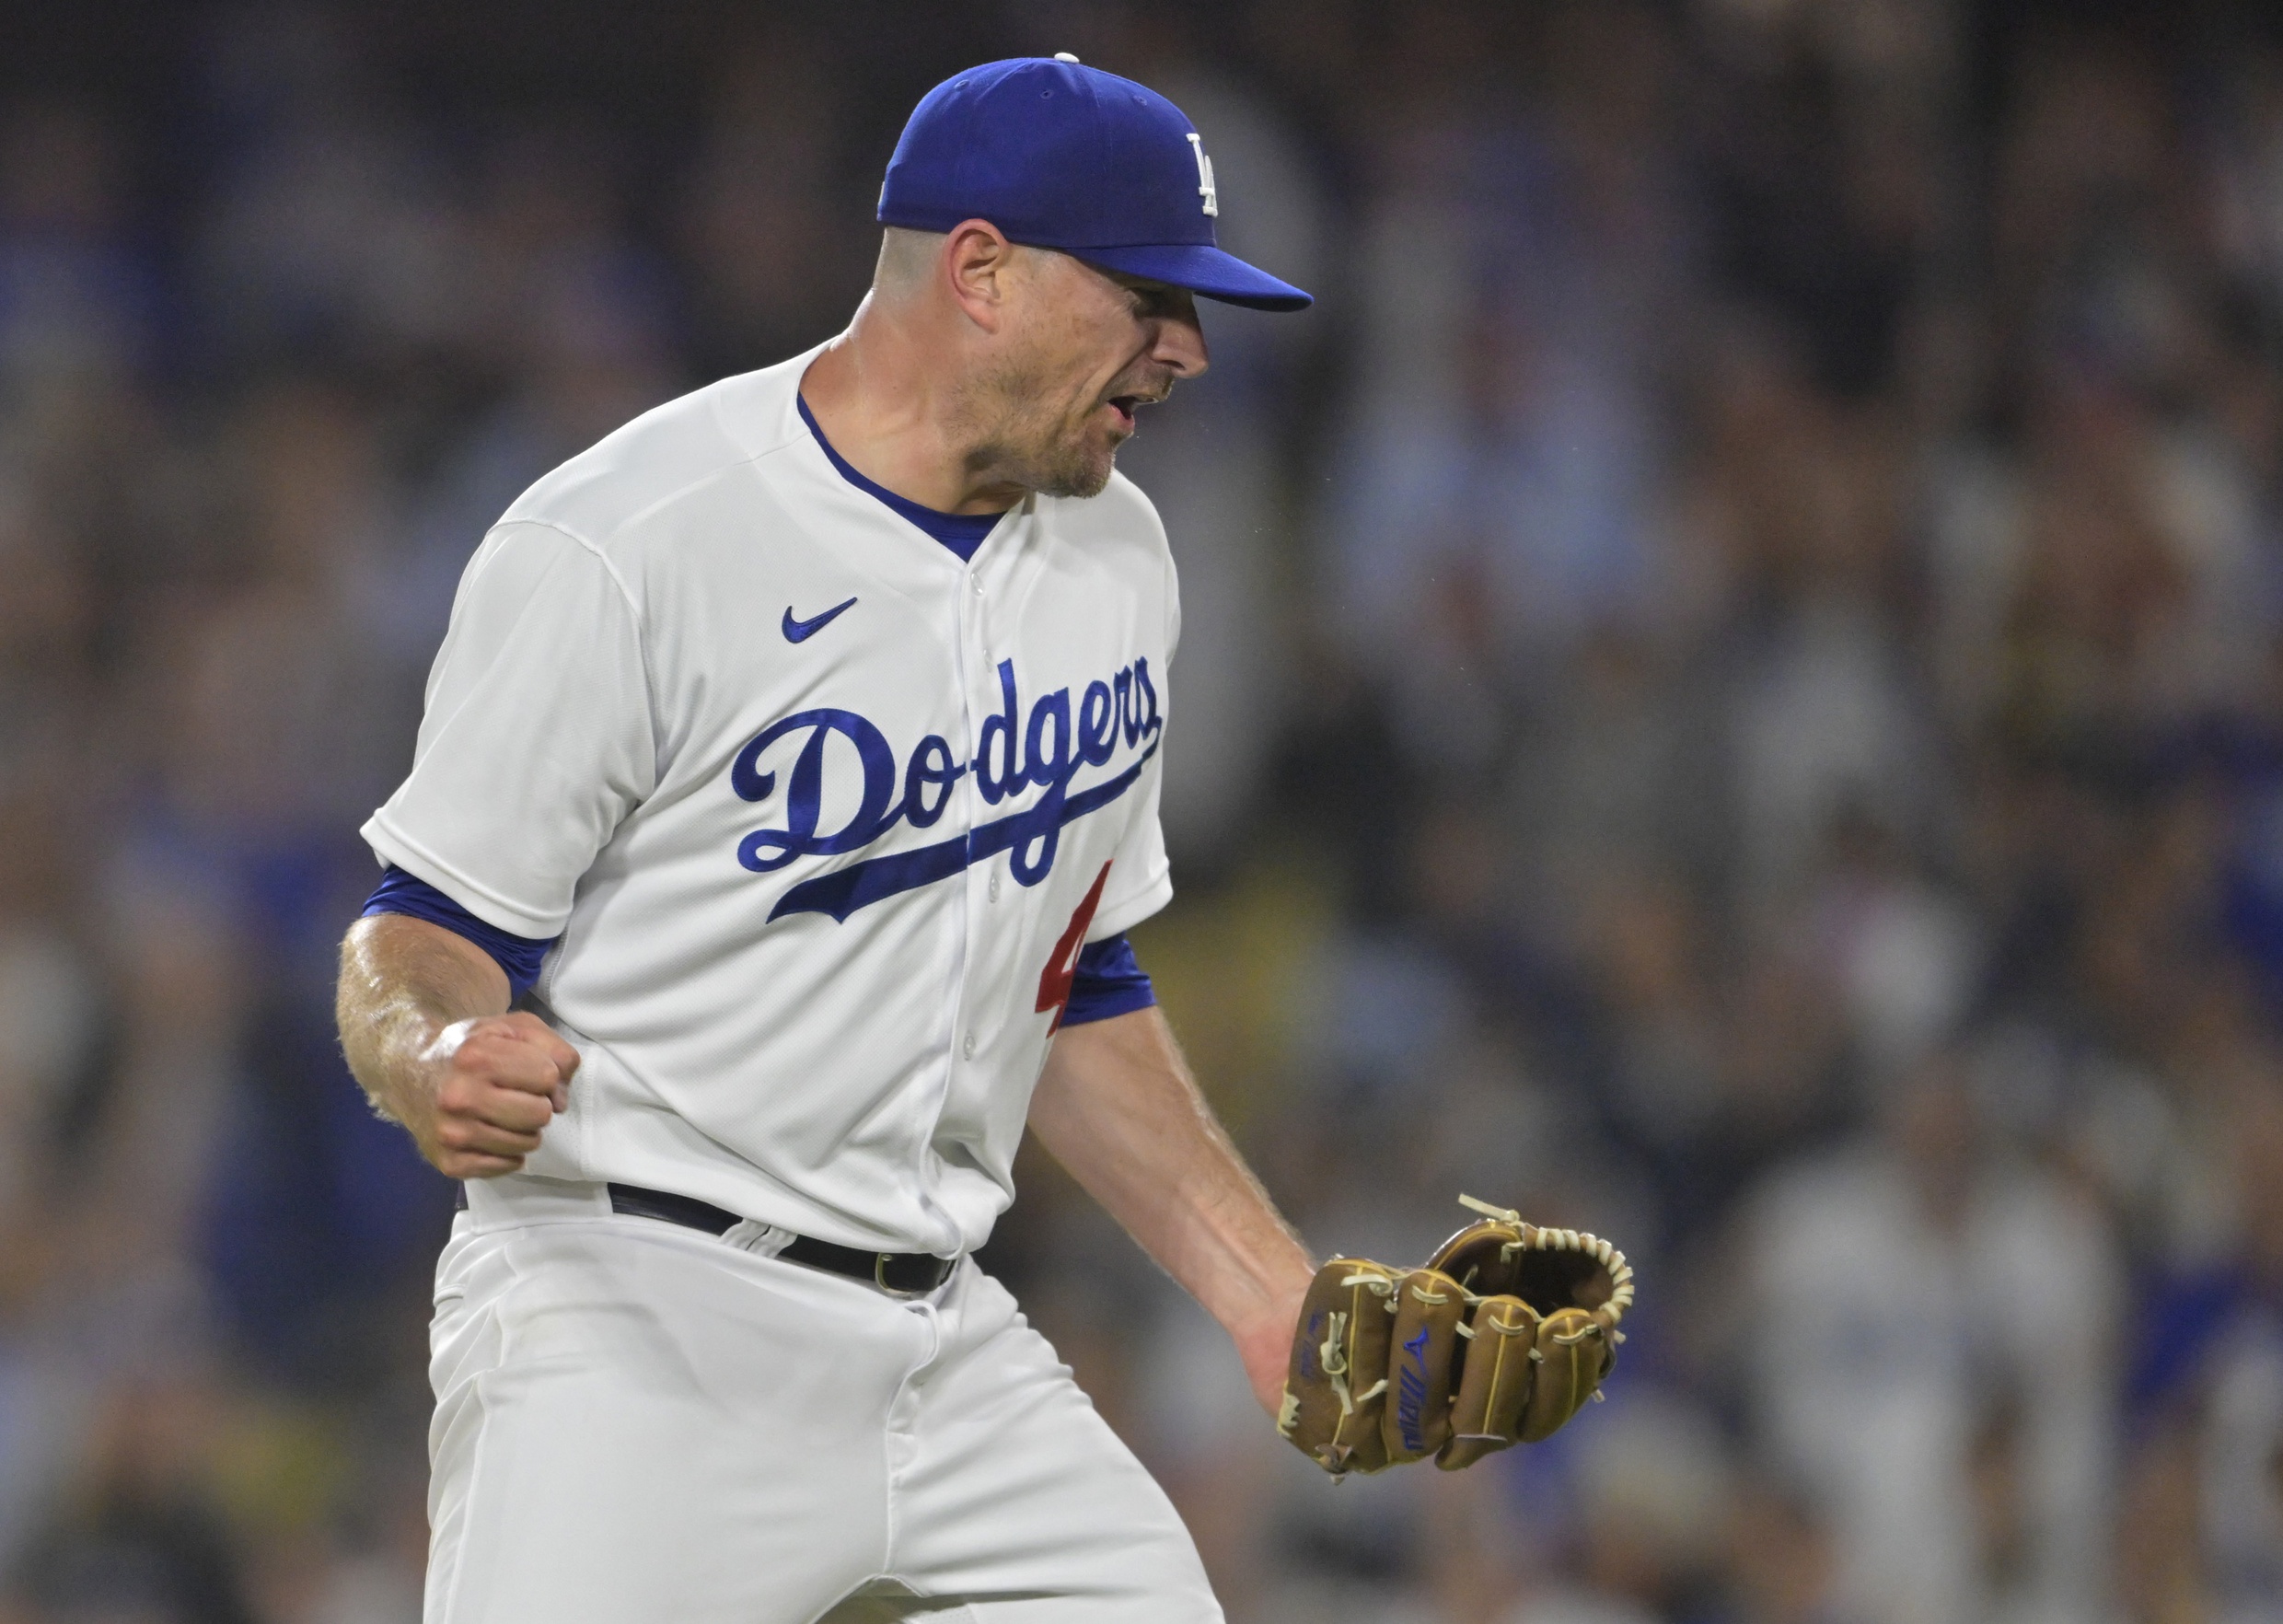 Dodgers Injury News: RHP Daniel Hudson Has ‘Outside’ Chance of Returning in 2023